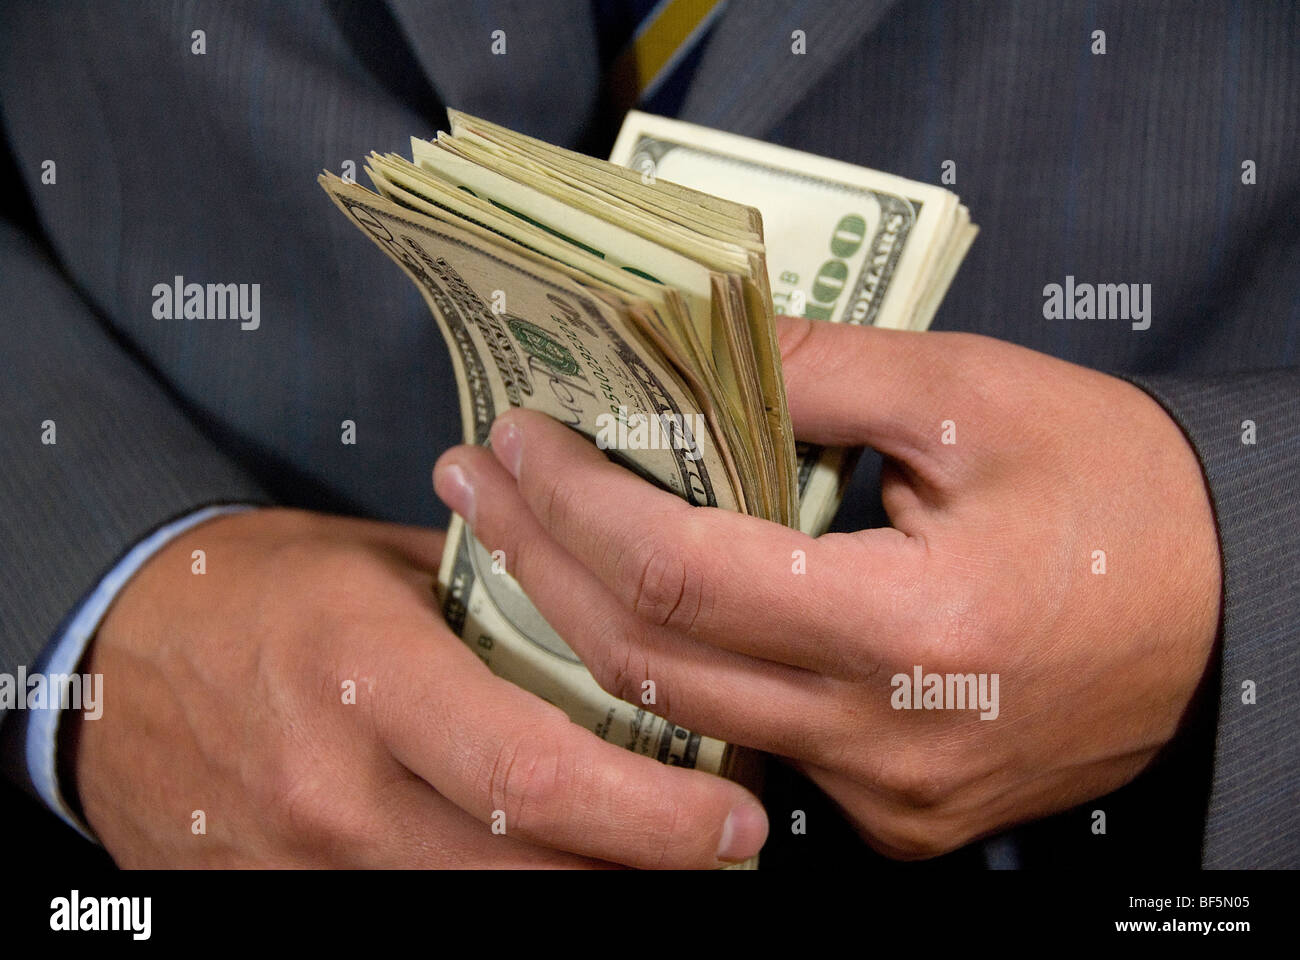 a holding a stack of 100 dollar bills Stock Photo